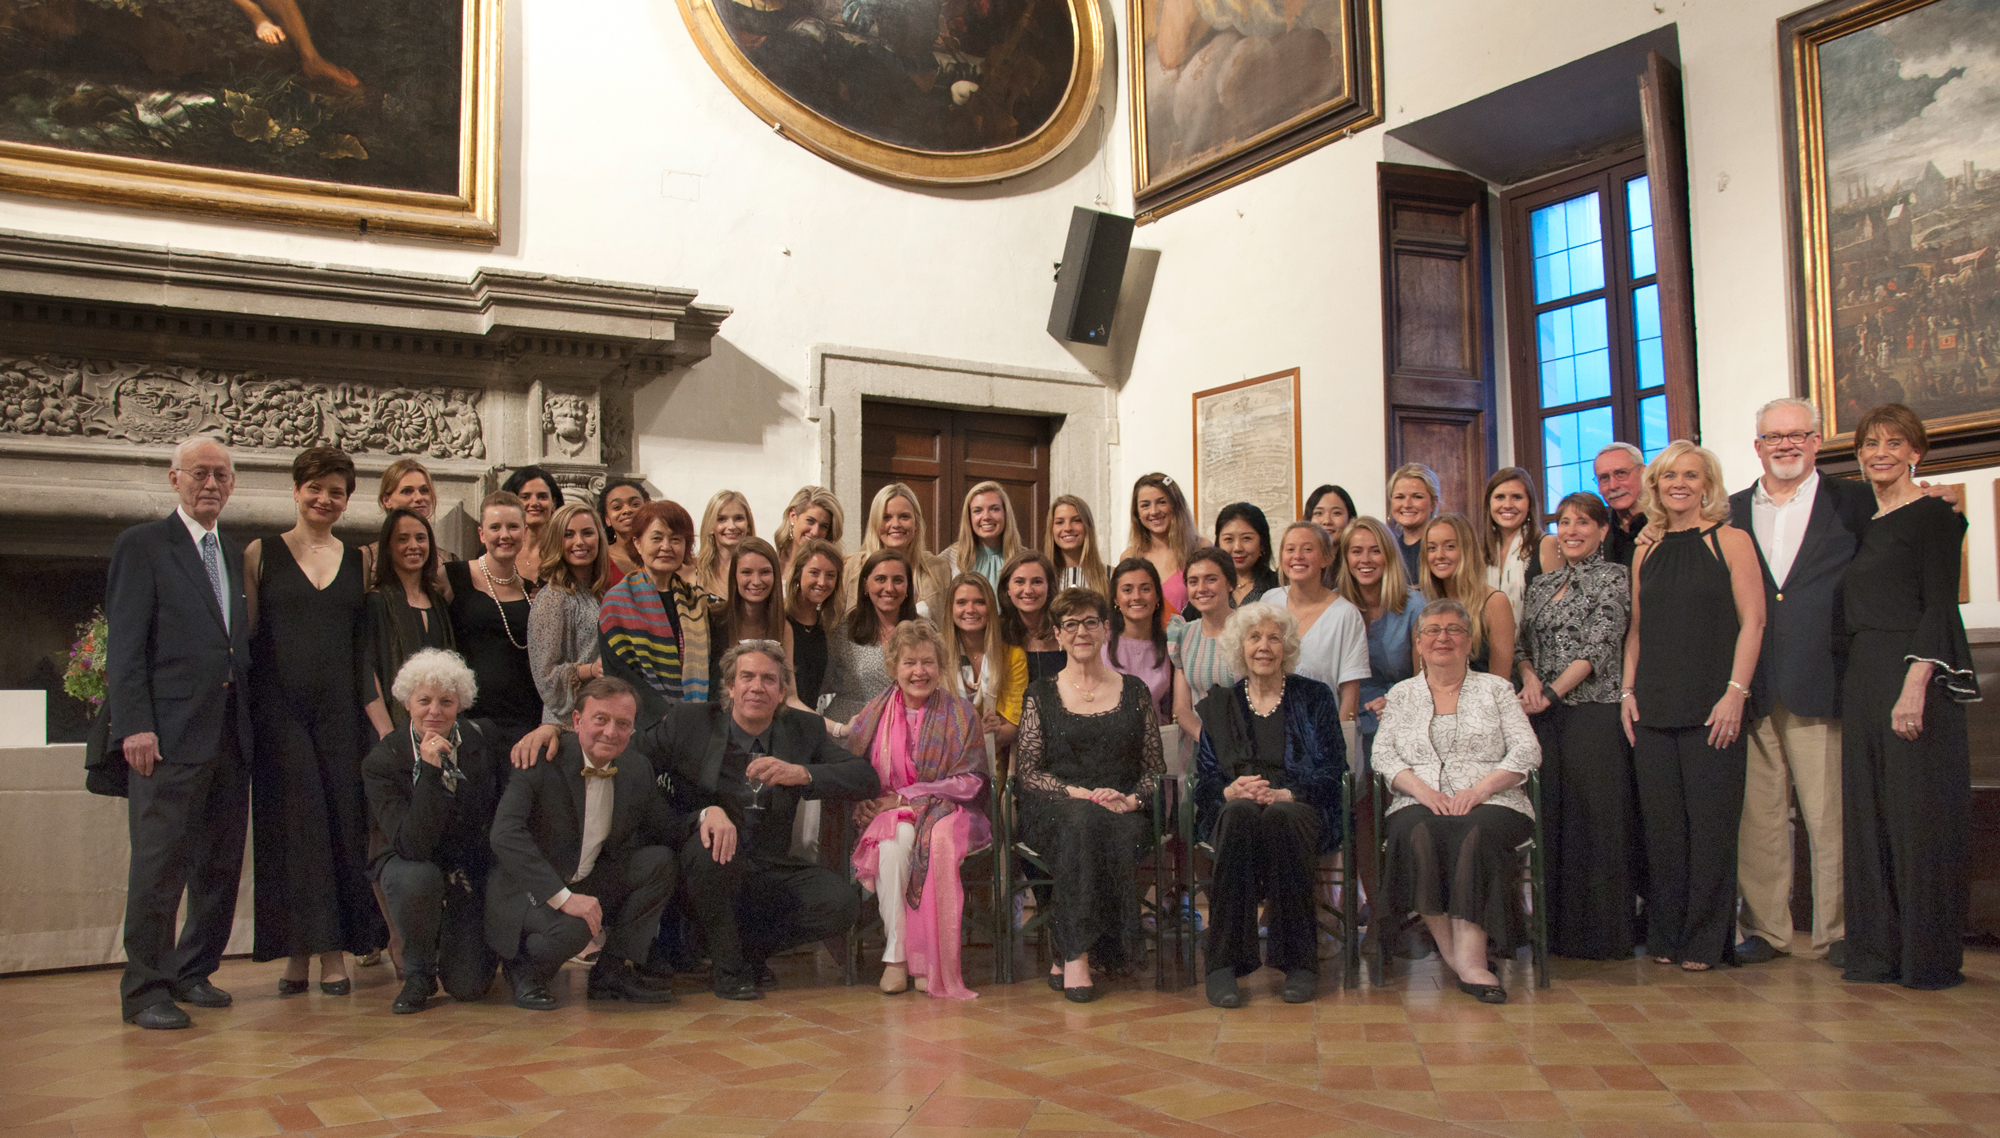 Harriet at the 50th Student group celebrtation at the Joseph S. Bruno Auburn Abroad program in Italy.